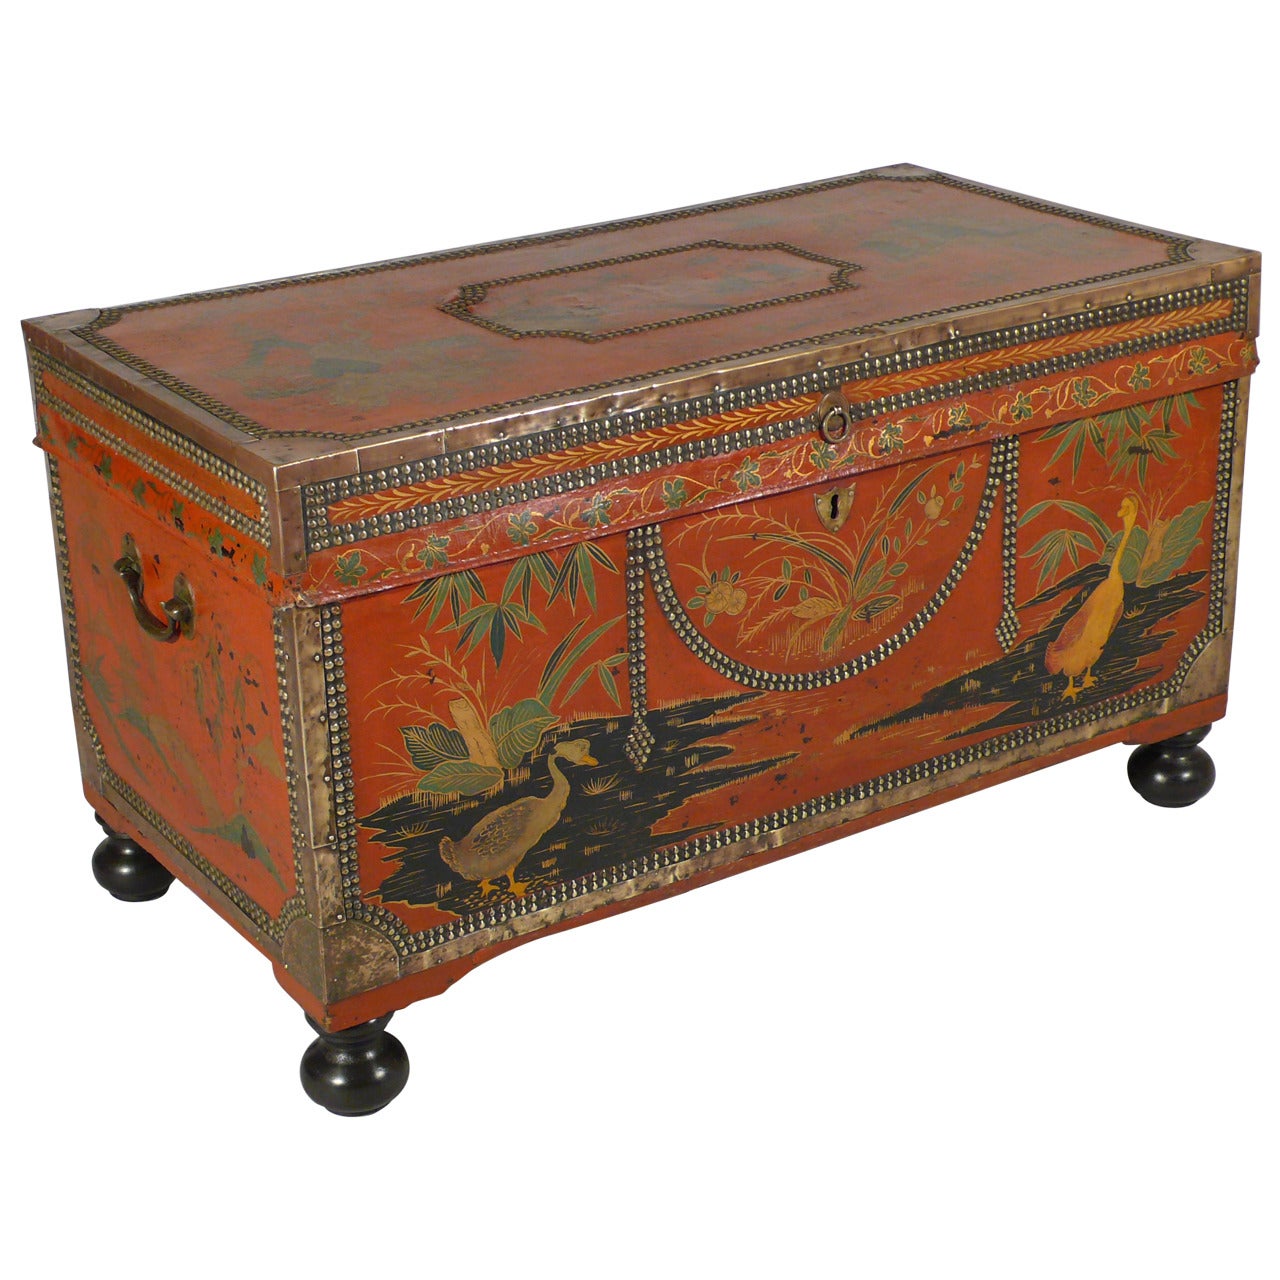 Red Leather Export Trunk with Painted Chinoiserie Decoration, Georgian